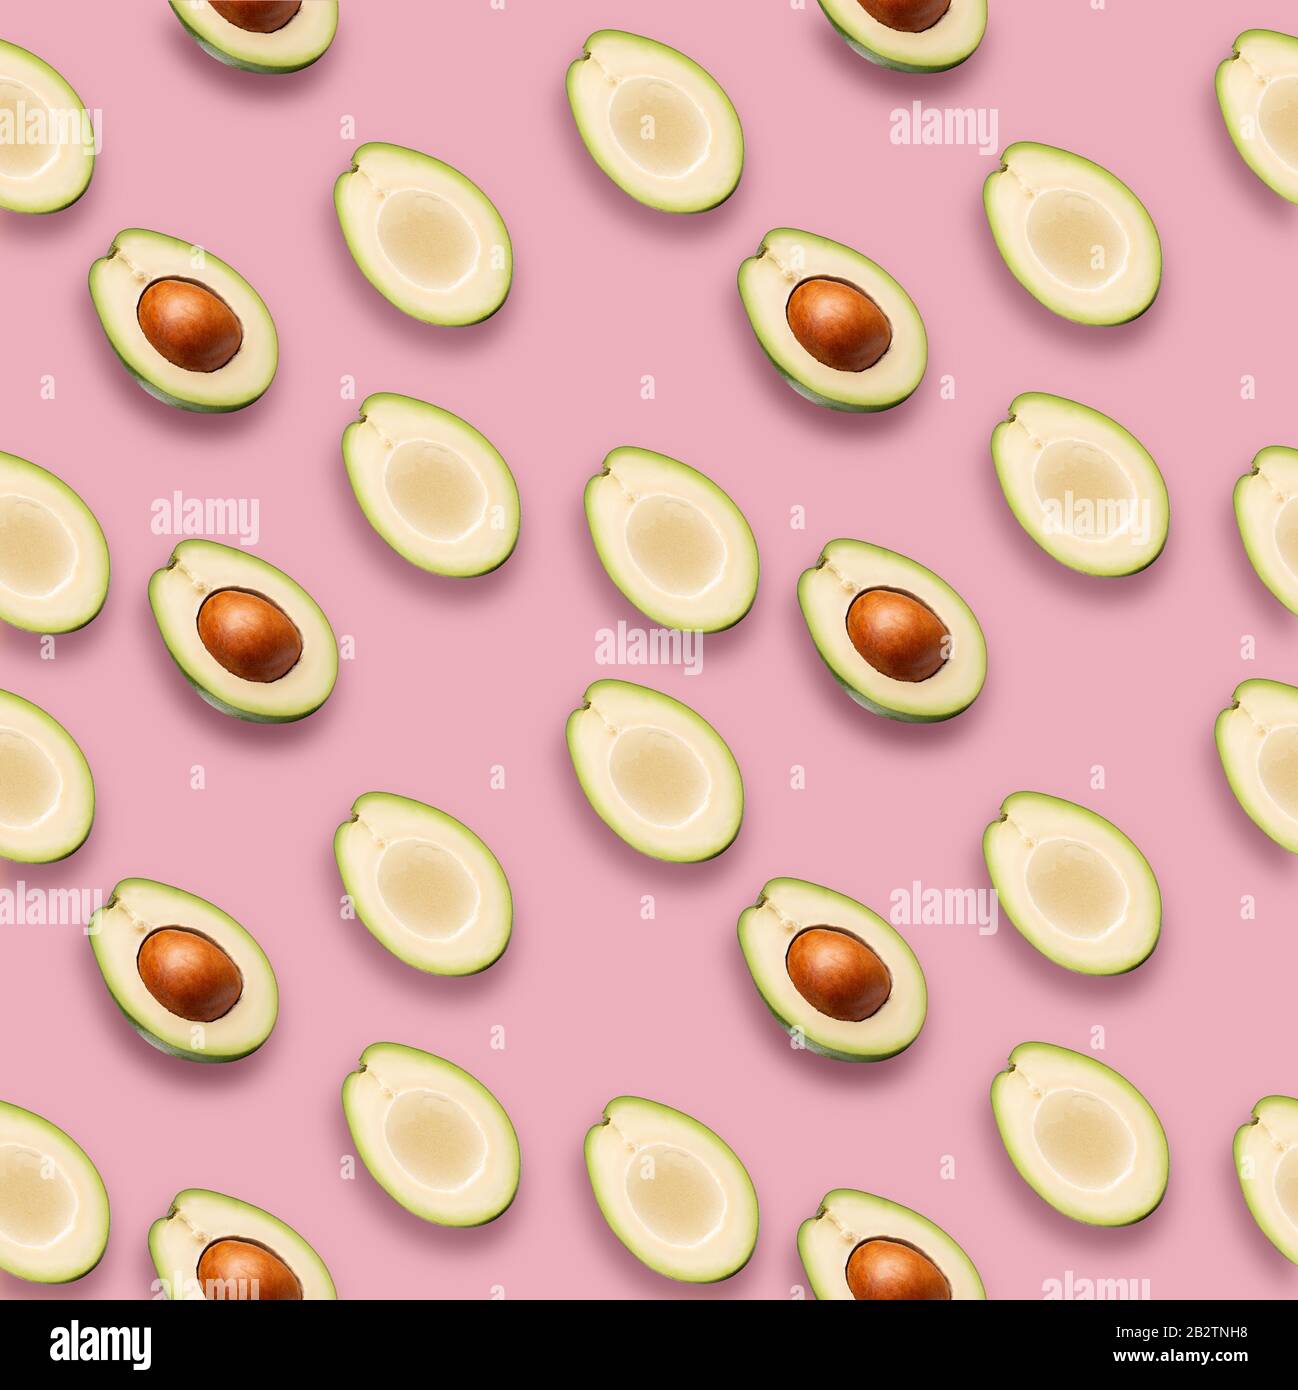 pattern with avocado slices on a pink background. Stock Photo